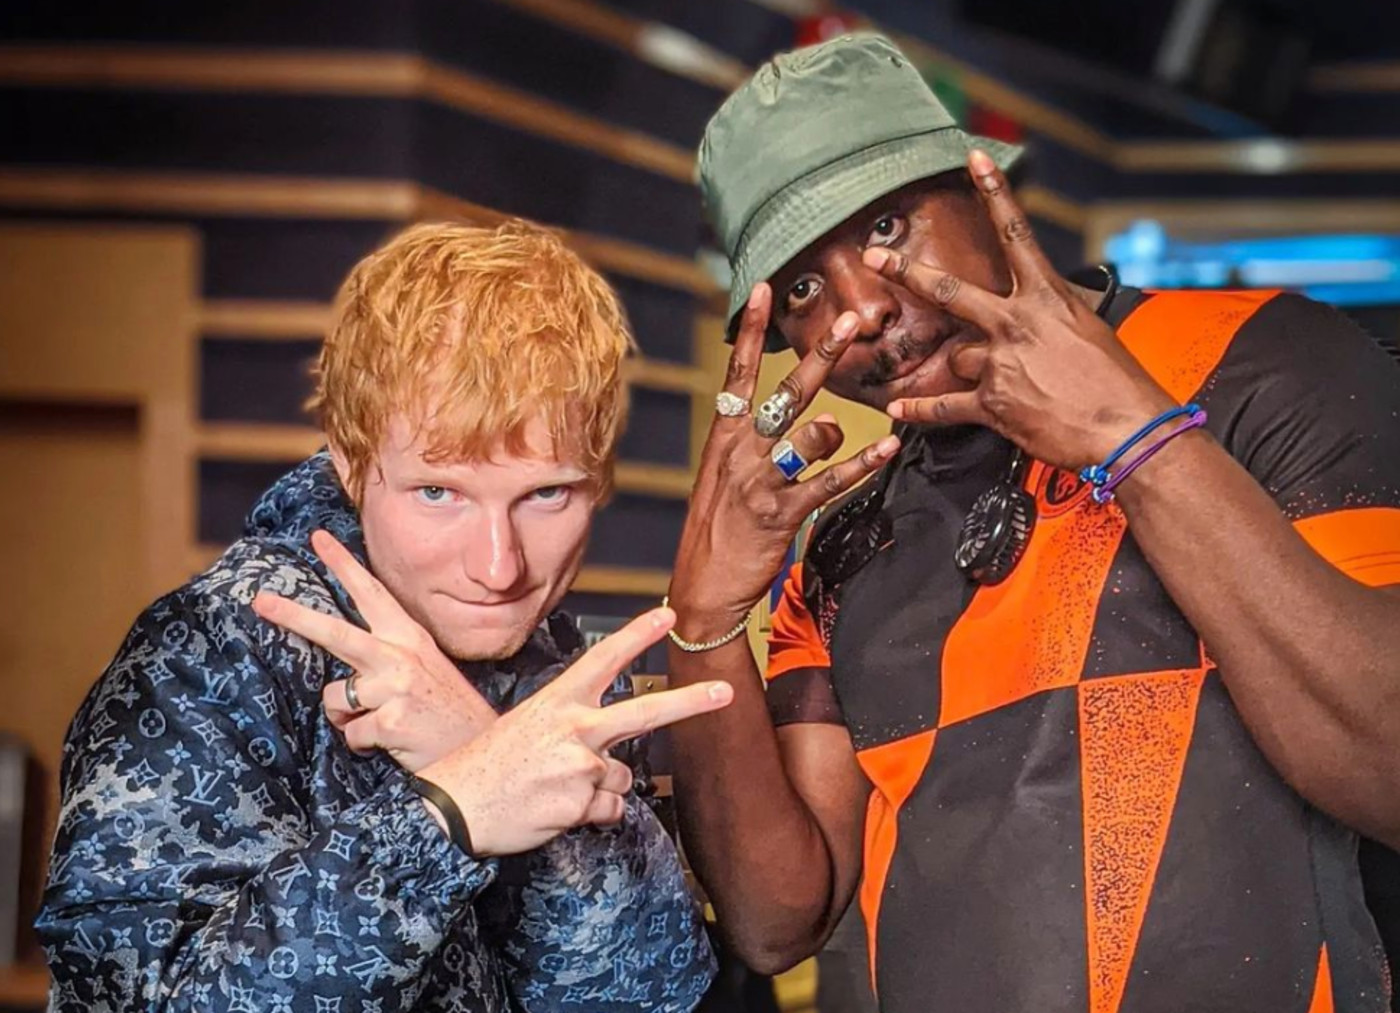 Ed Sheeran lost his closest friend Jamal Edwards, who passed away in February last year at 31 